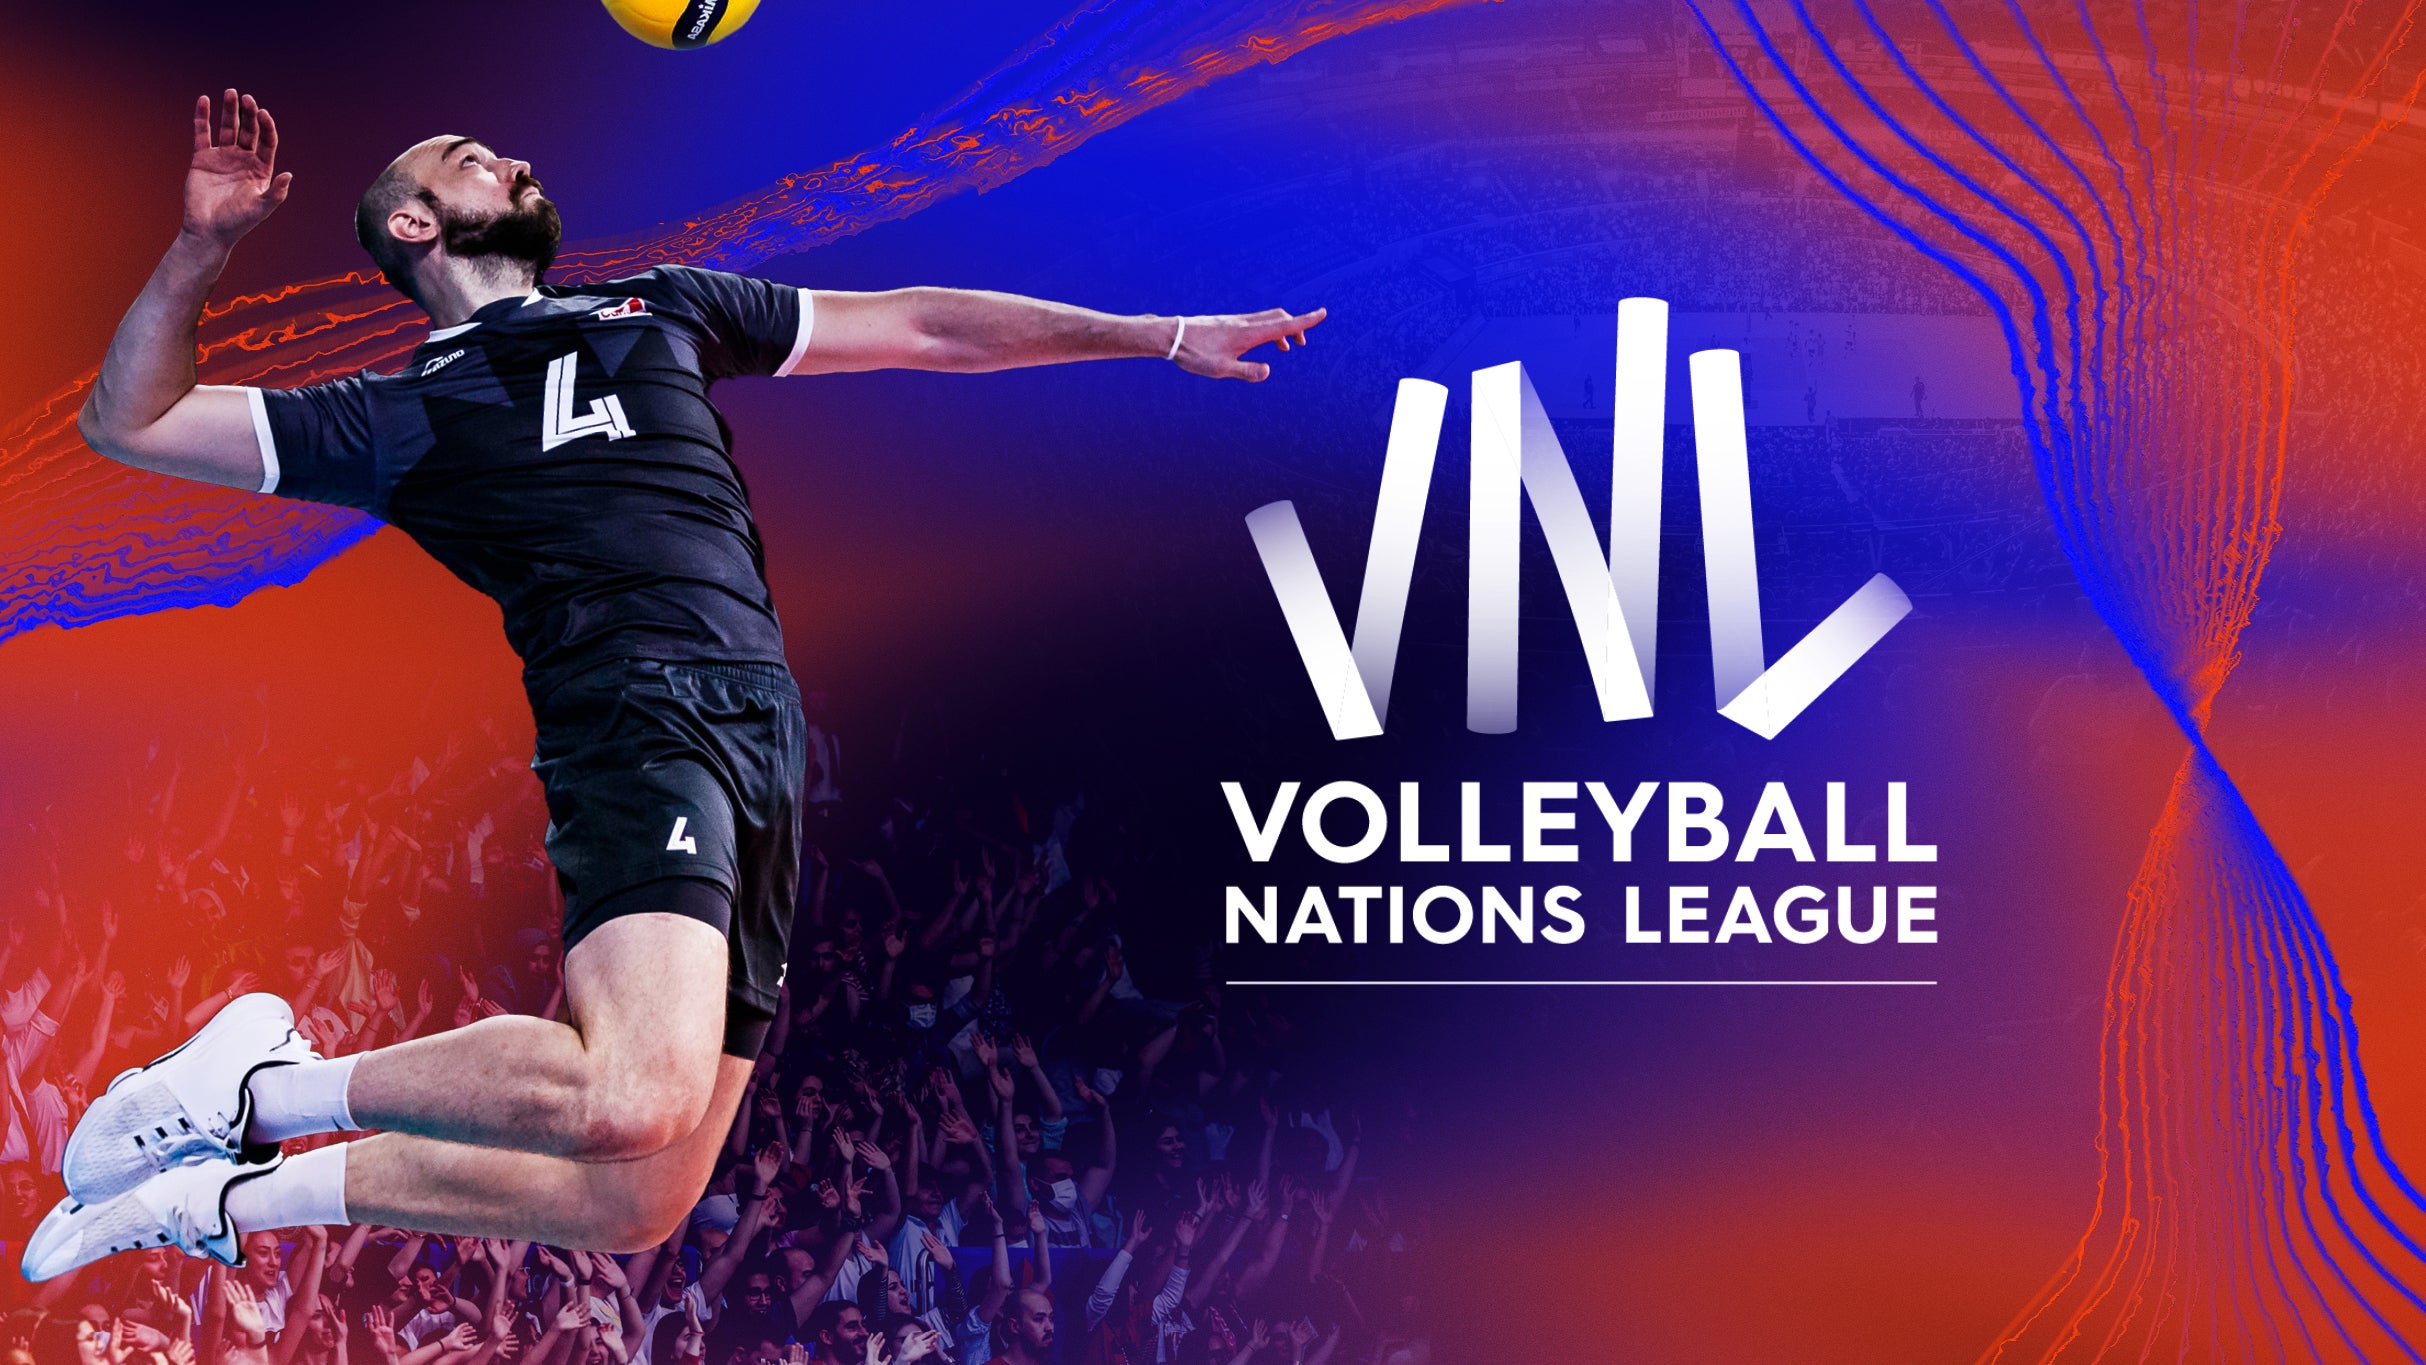 Volleyball Nations League - June 9 in Ottawa promo photo for TD Place Insider presale offer code